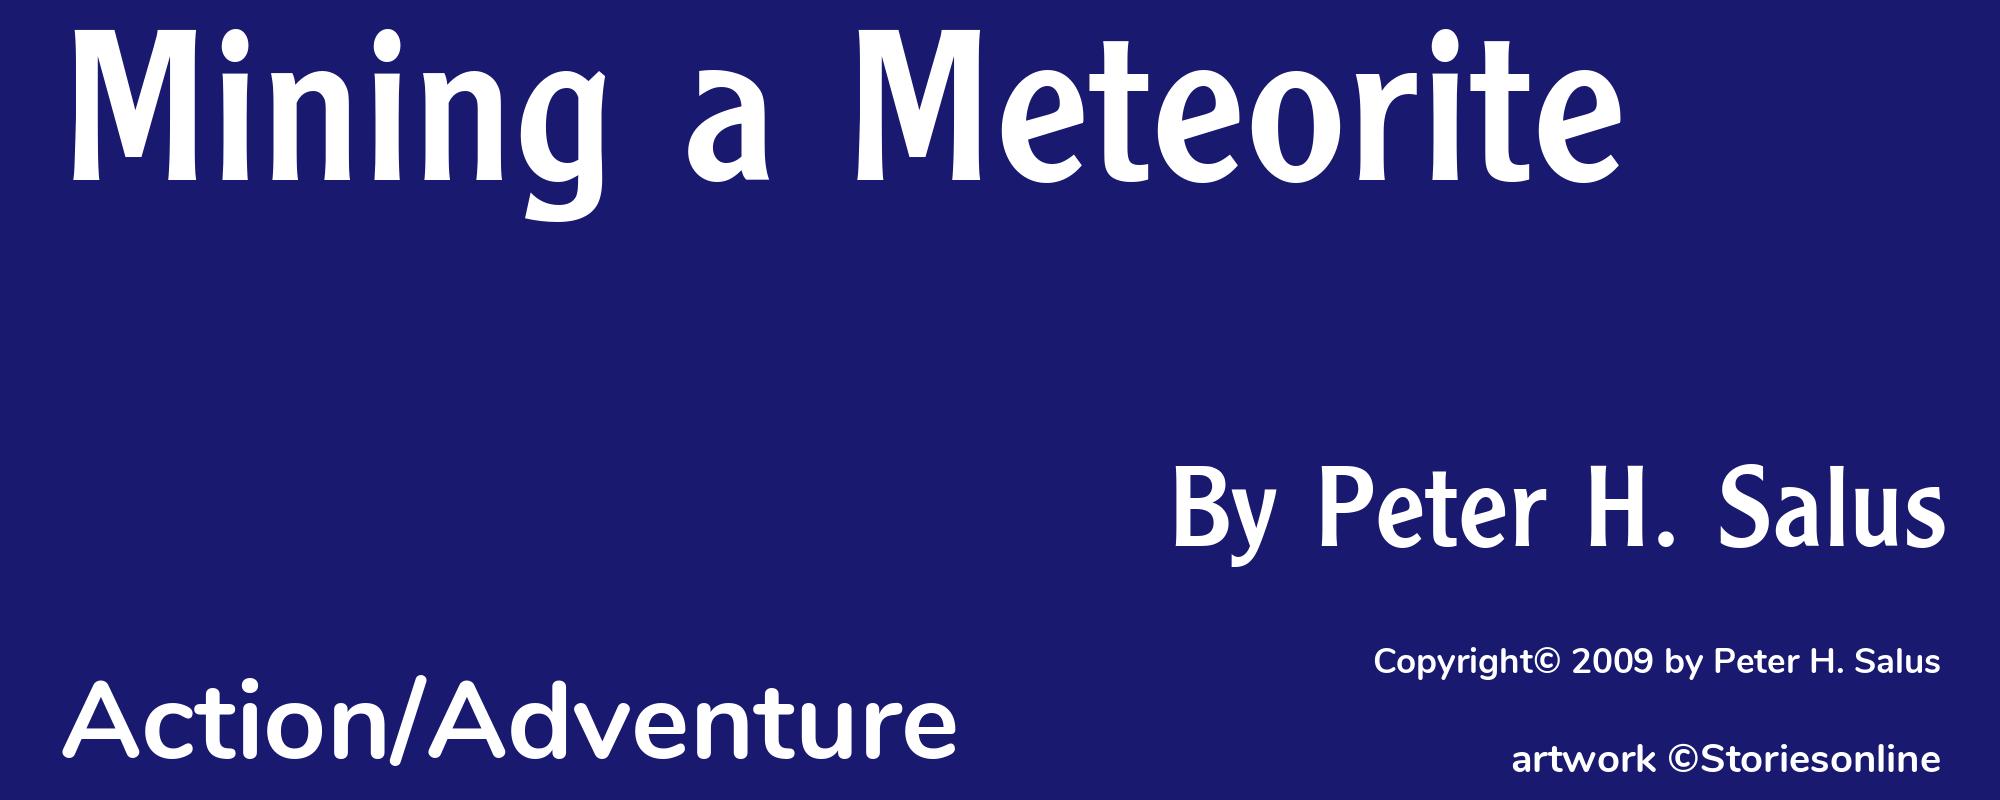 Mining a Meteorite - Cover